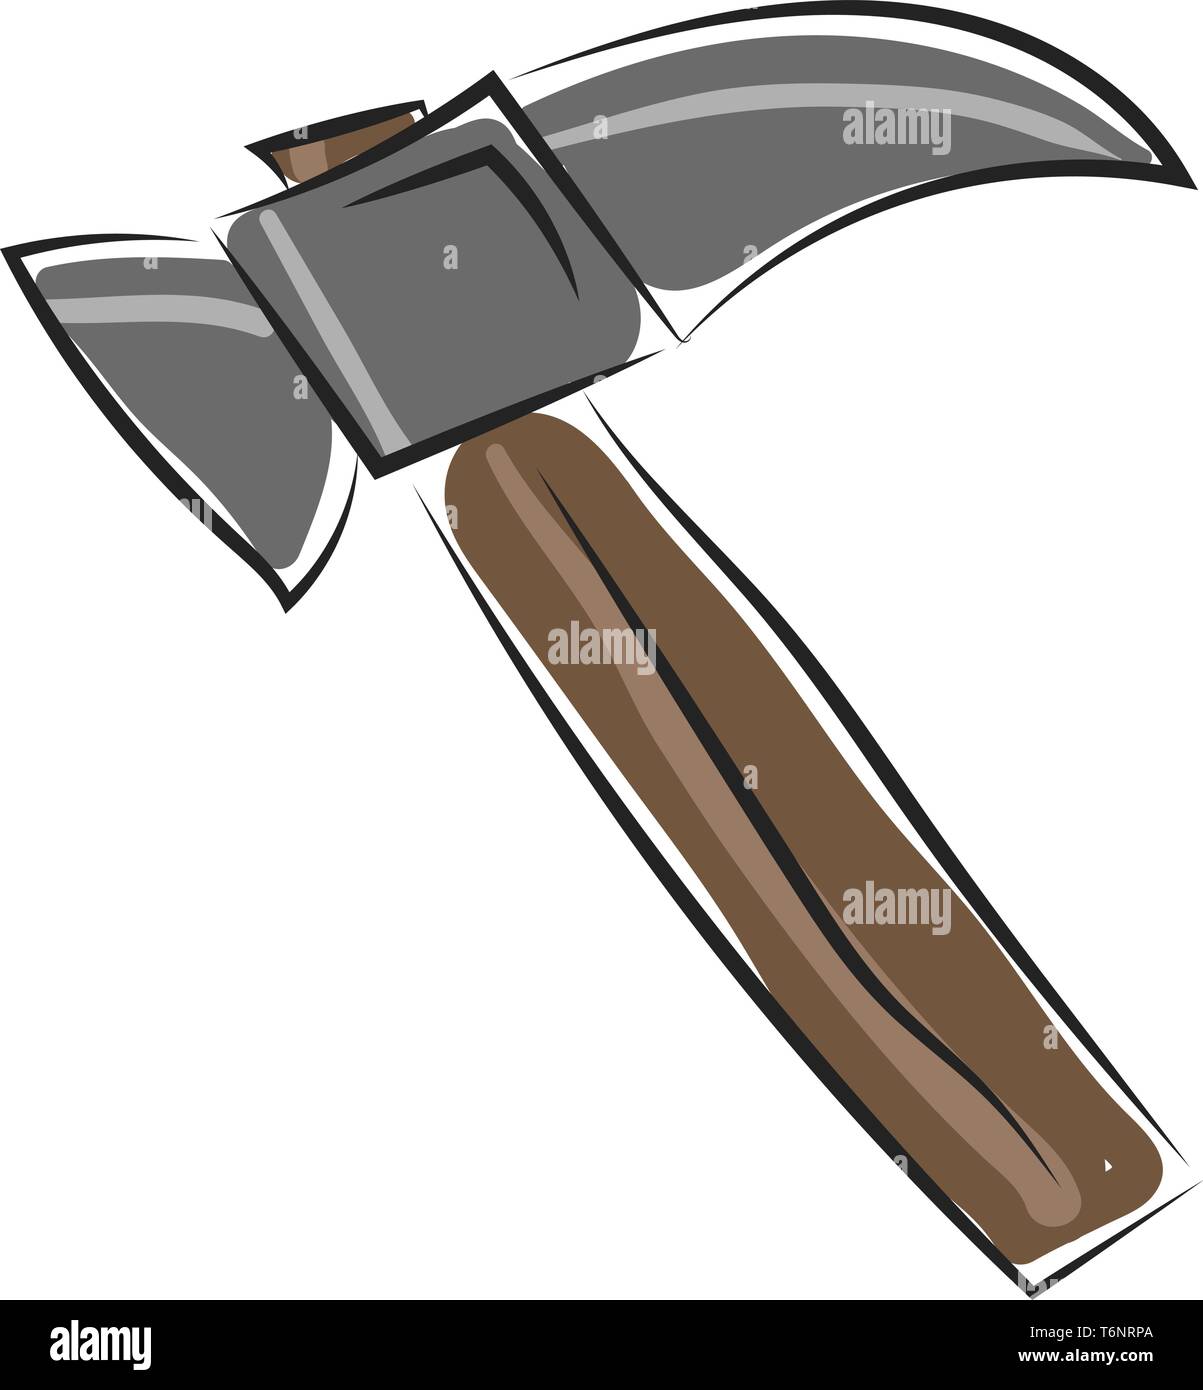 Clipart of a hammer with a large metal head mounted at right angles at the end of a brown handle used for driving in nails  vector  color drawing or i Stock Vector